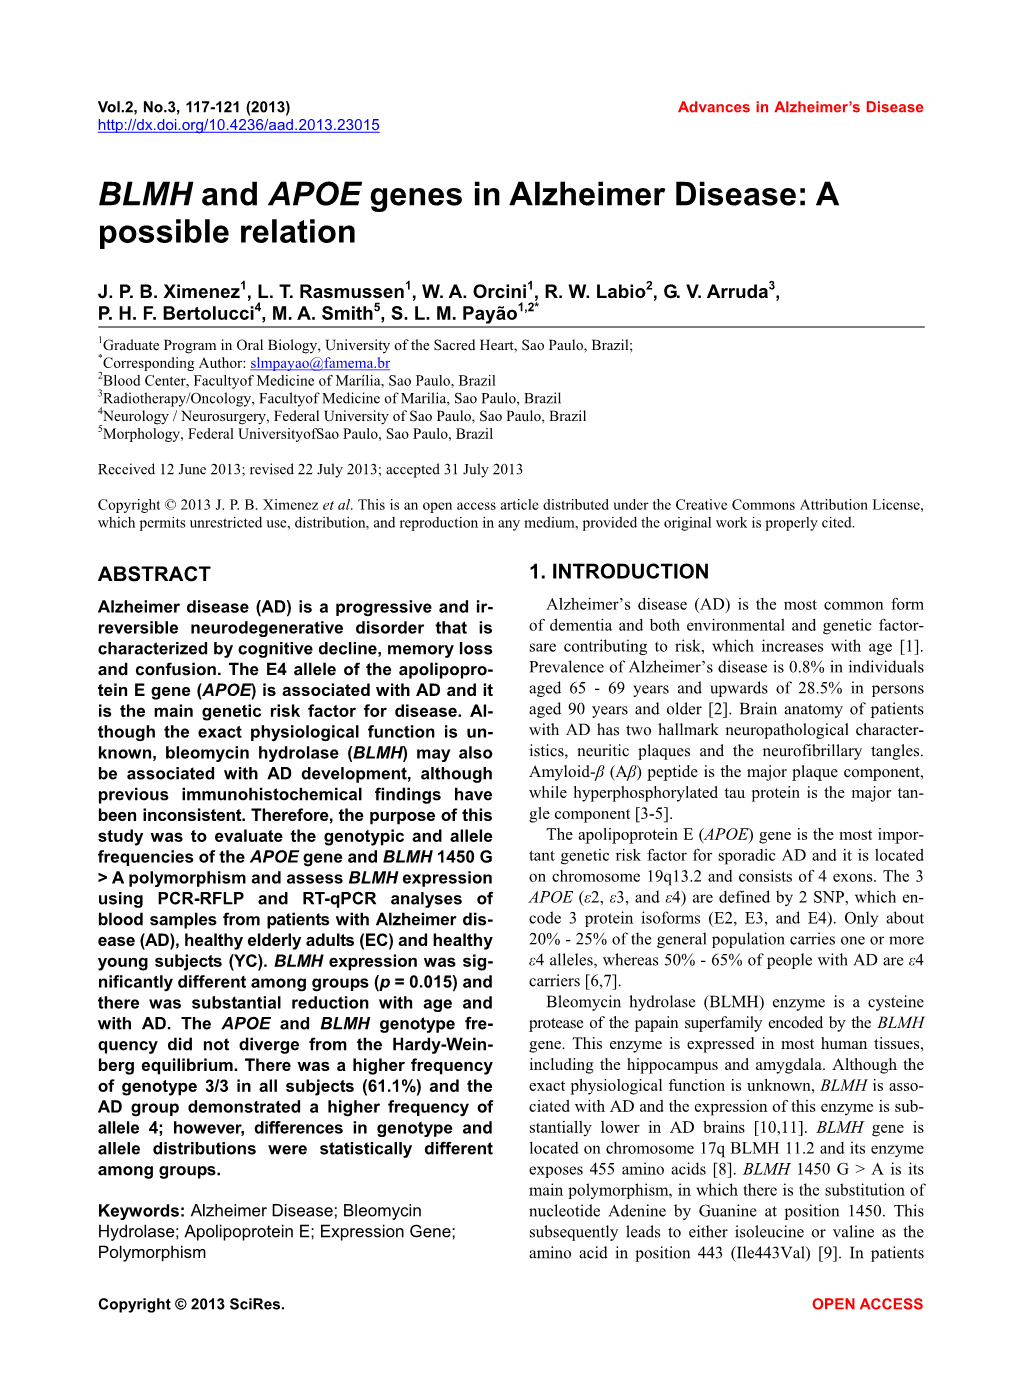 BLMH and APOE Genes in Alzheimer Disease: a Possible Relation